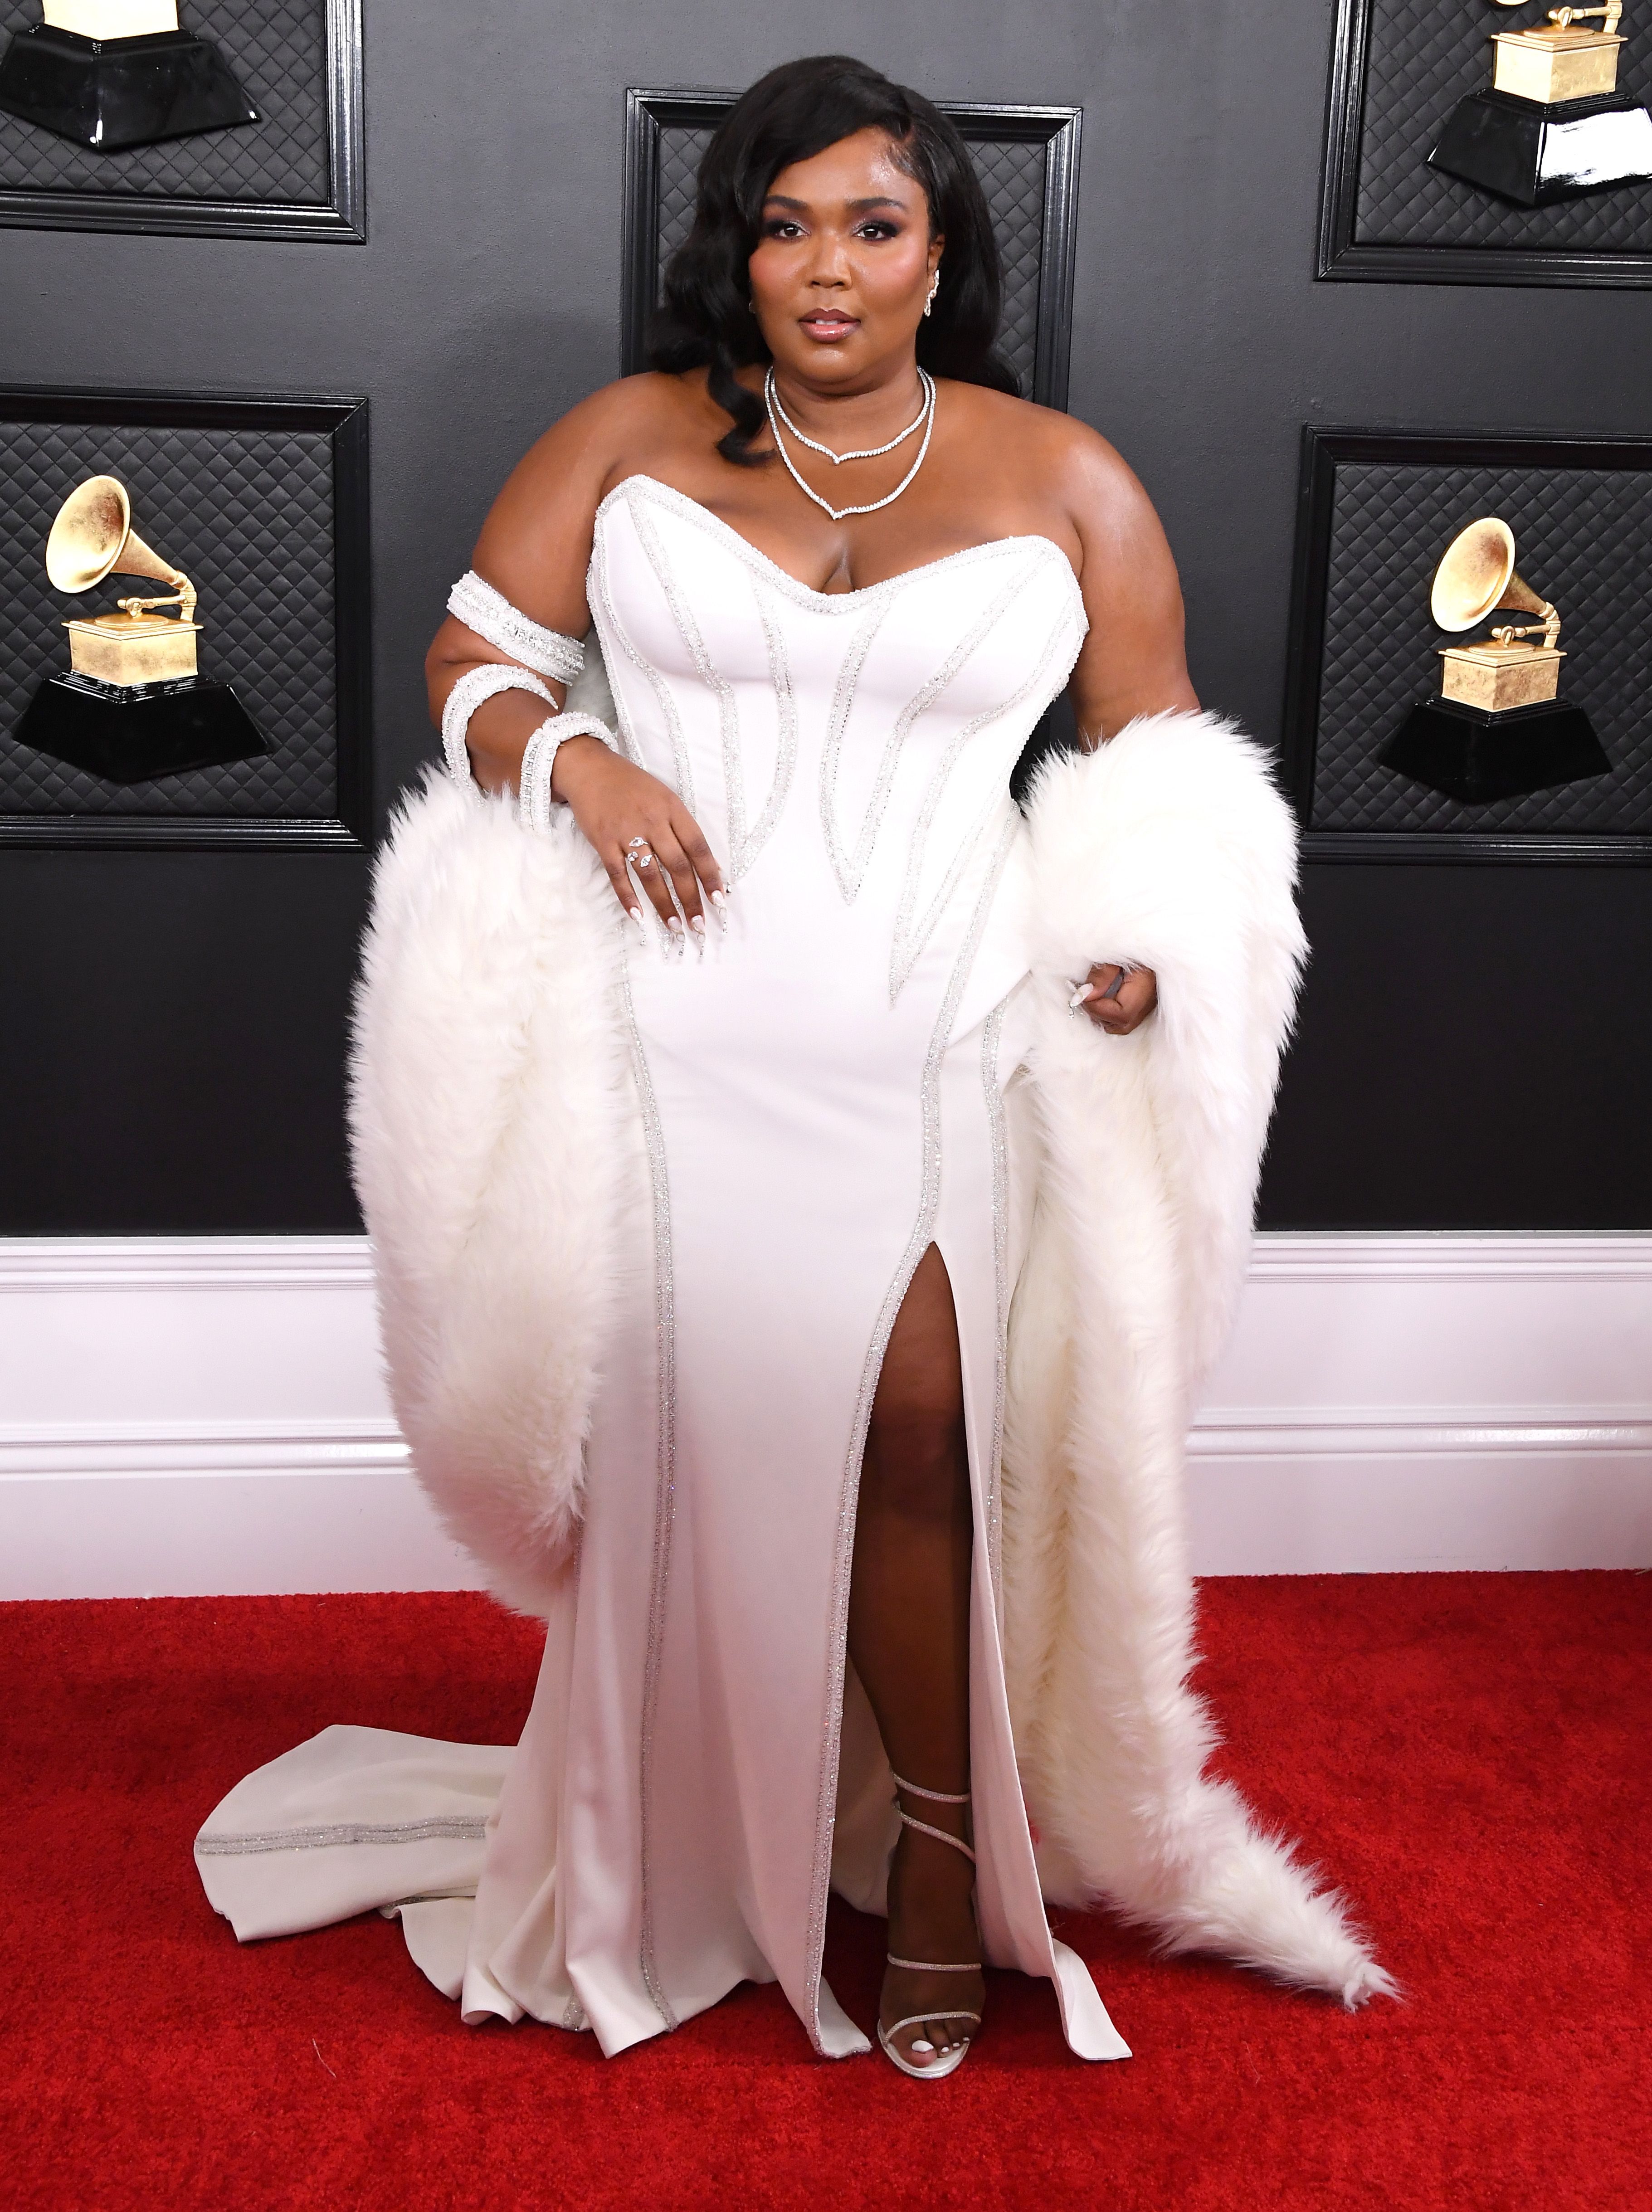 Lizzo at the 62nd Annual Grammy Awards at Staples Center on January 26, 2020, in Los Angeles, California | Photo: Steve Granitz/WireImage/Getty Images